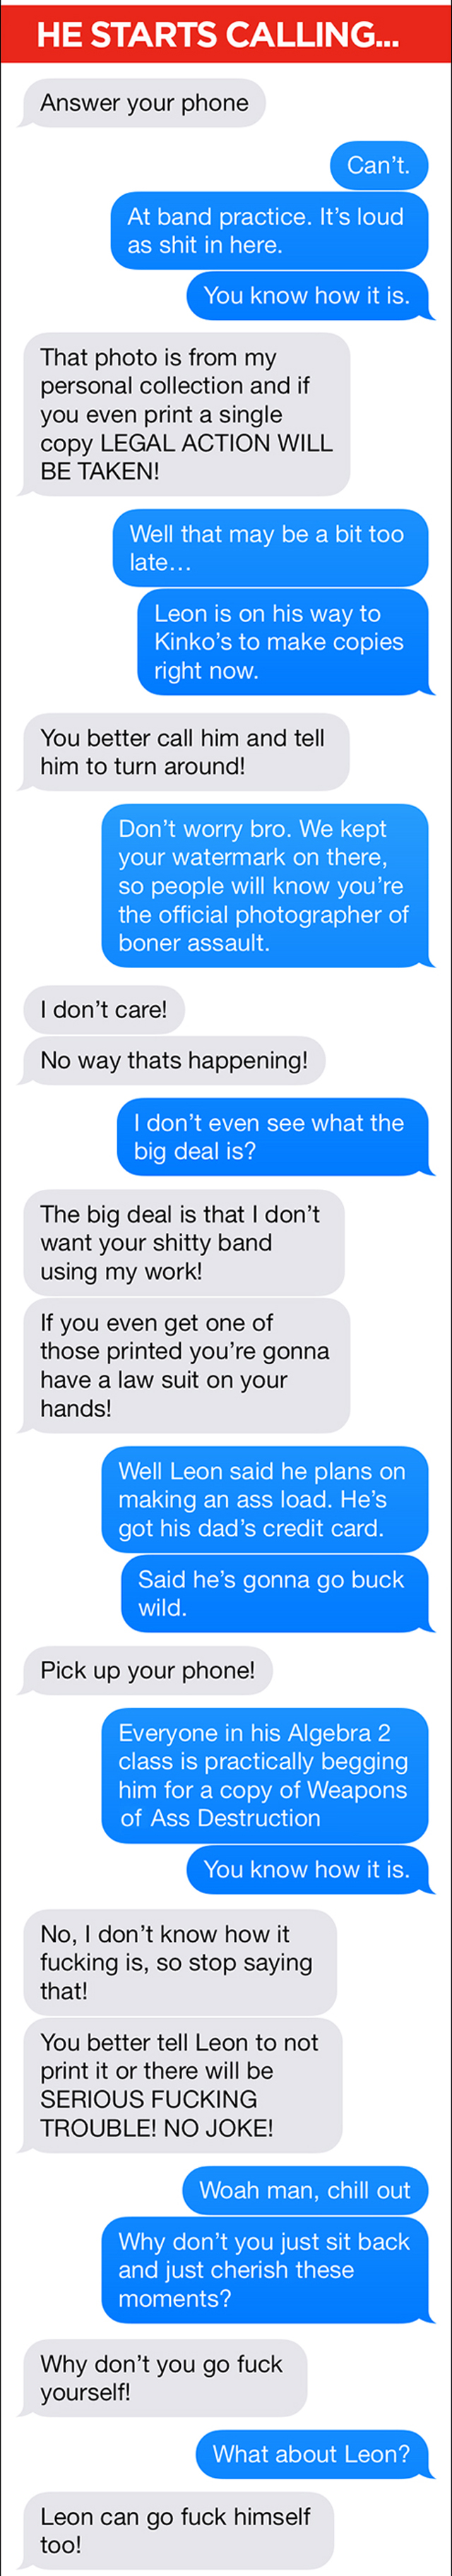 Photographer gets text trolled